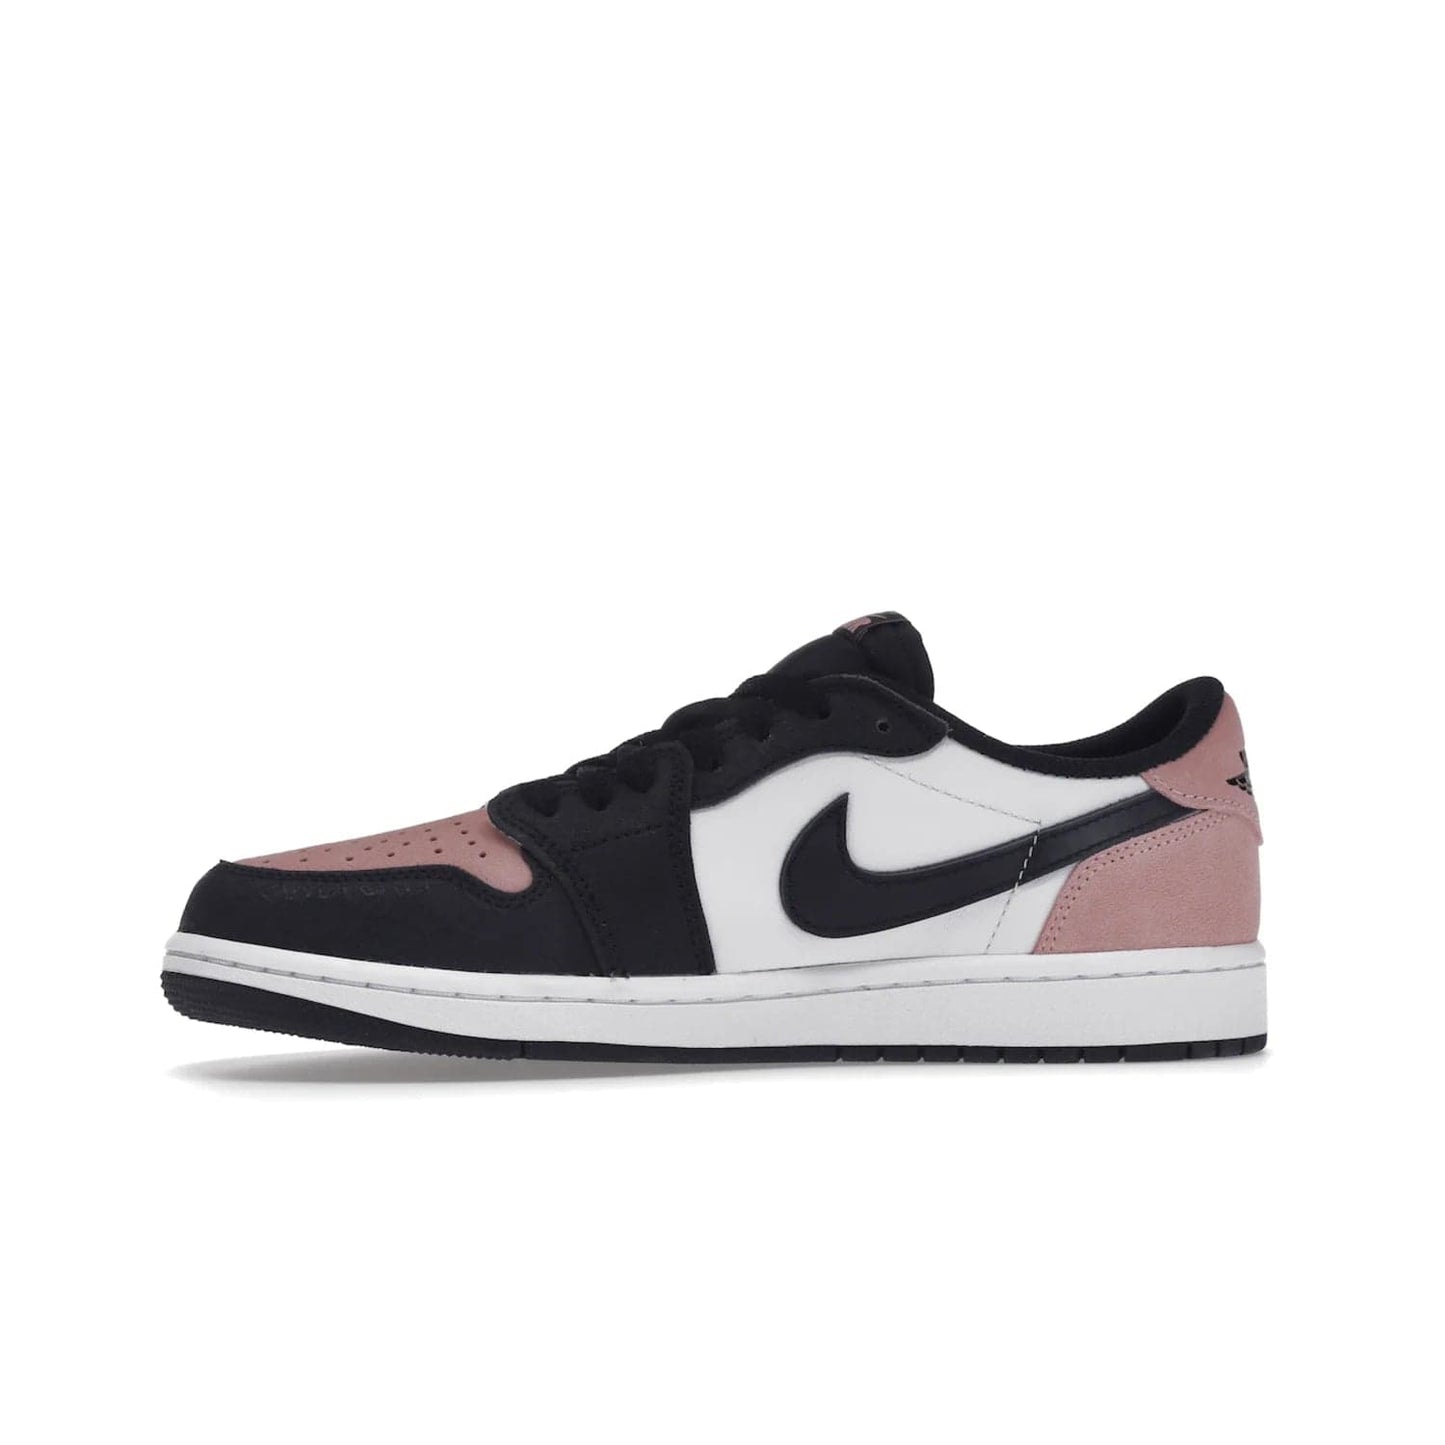 Jordan 1 Low OG Bleached Coral - Image 18 - Only at www.BallersClubKickz.com - Introducing the Air Jordan 1 Low OG Bleached Coral. Constructed with white leather, black cracked leather & Bleached Coral suede. Signature Jordan Wings logo, white Air sole. Get the pack in July 2022 and stand out.